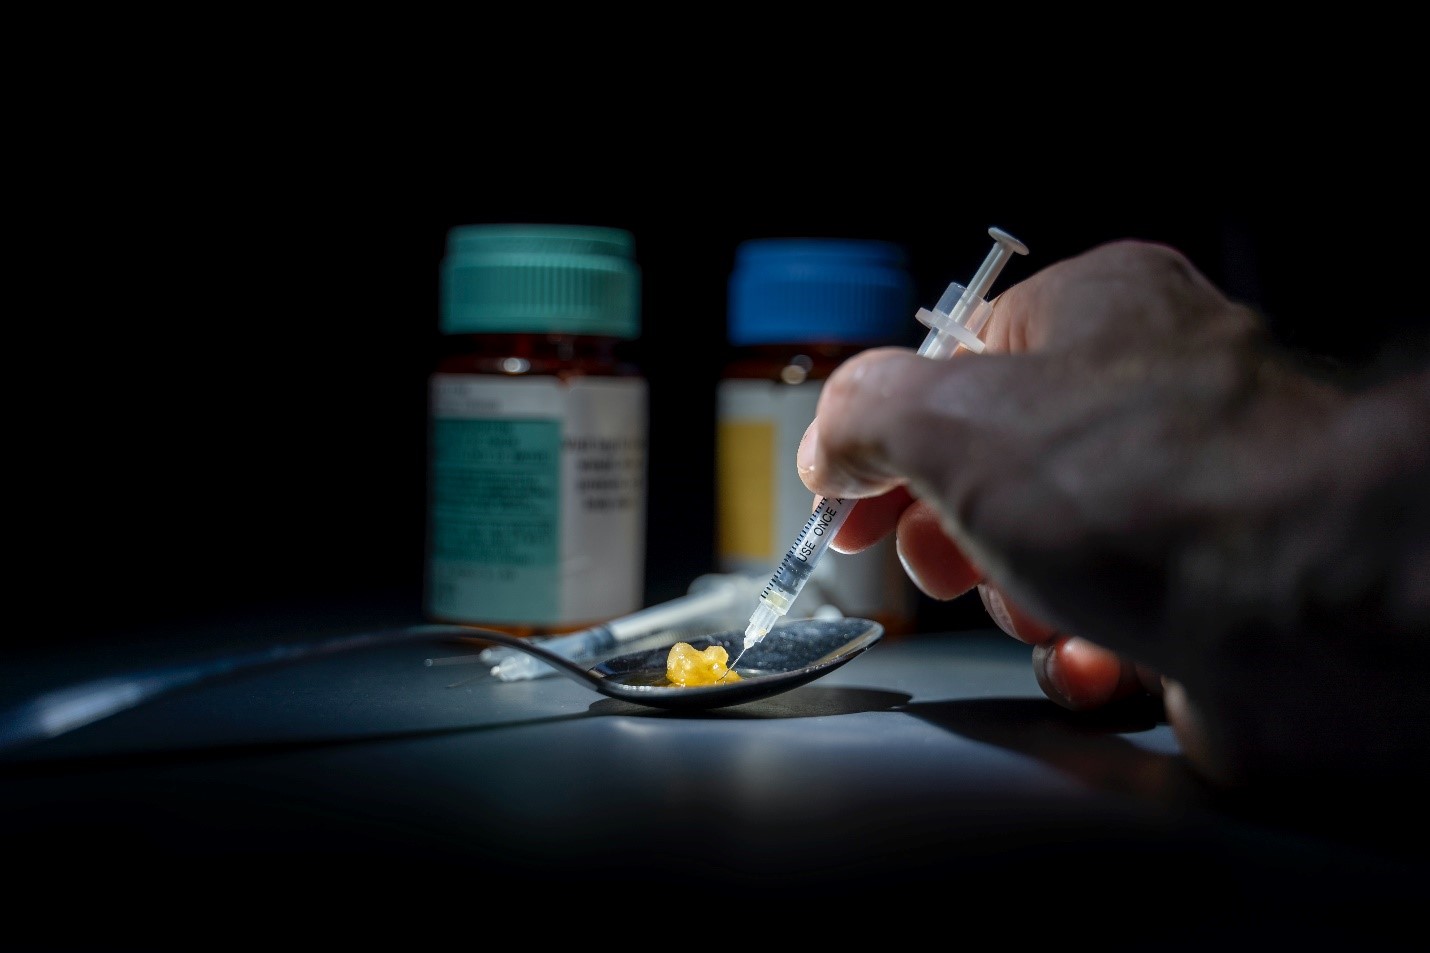 Drugs and syringe on a spoon